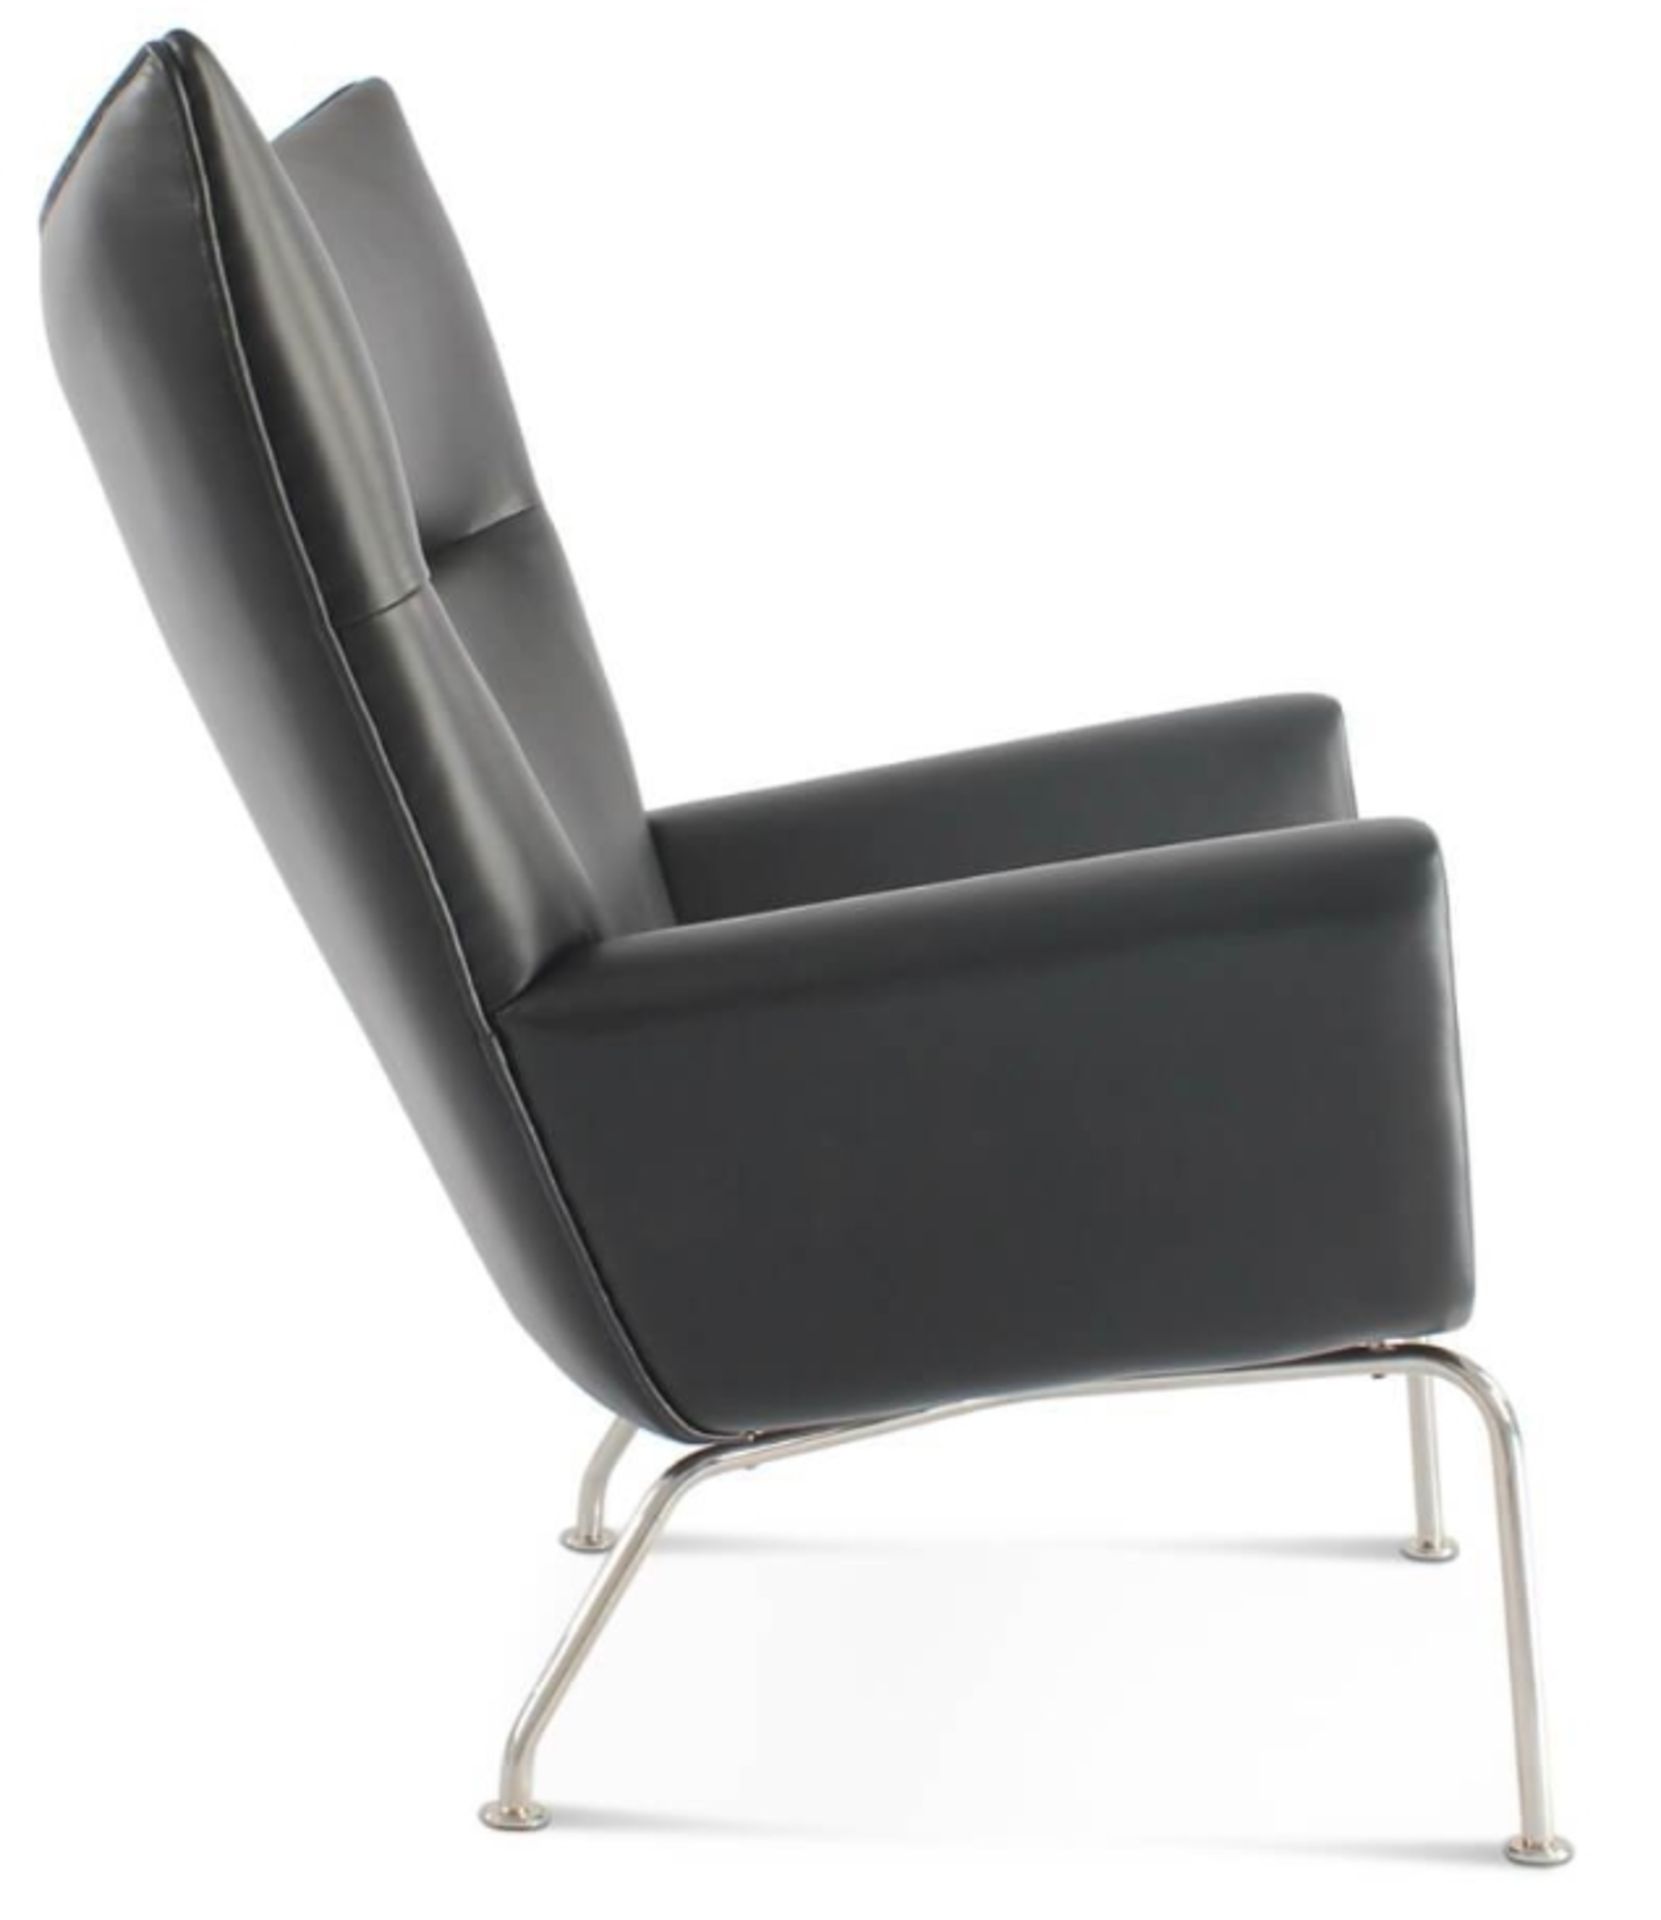 1 x Hans Wegner Inspired Wing Arm Chair - Genuine Black Leather Upholstery - Image 9 of 11